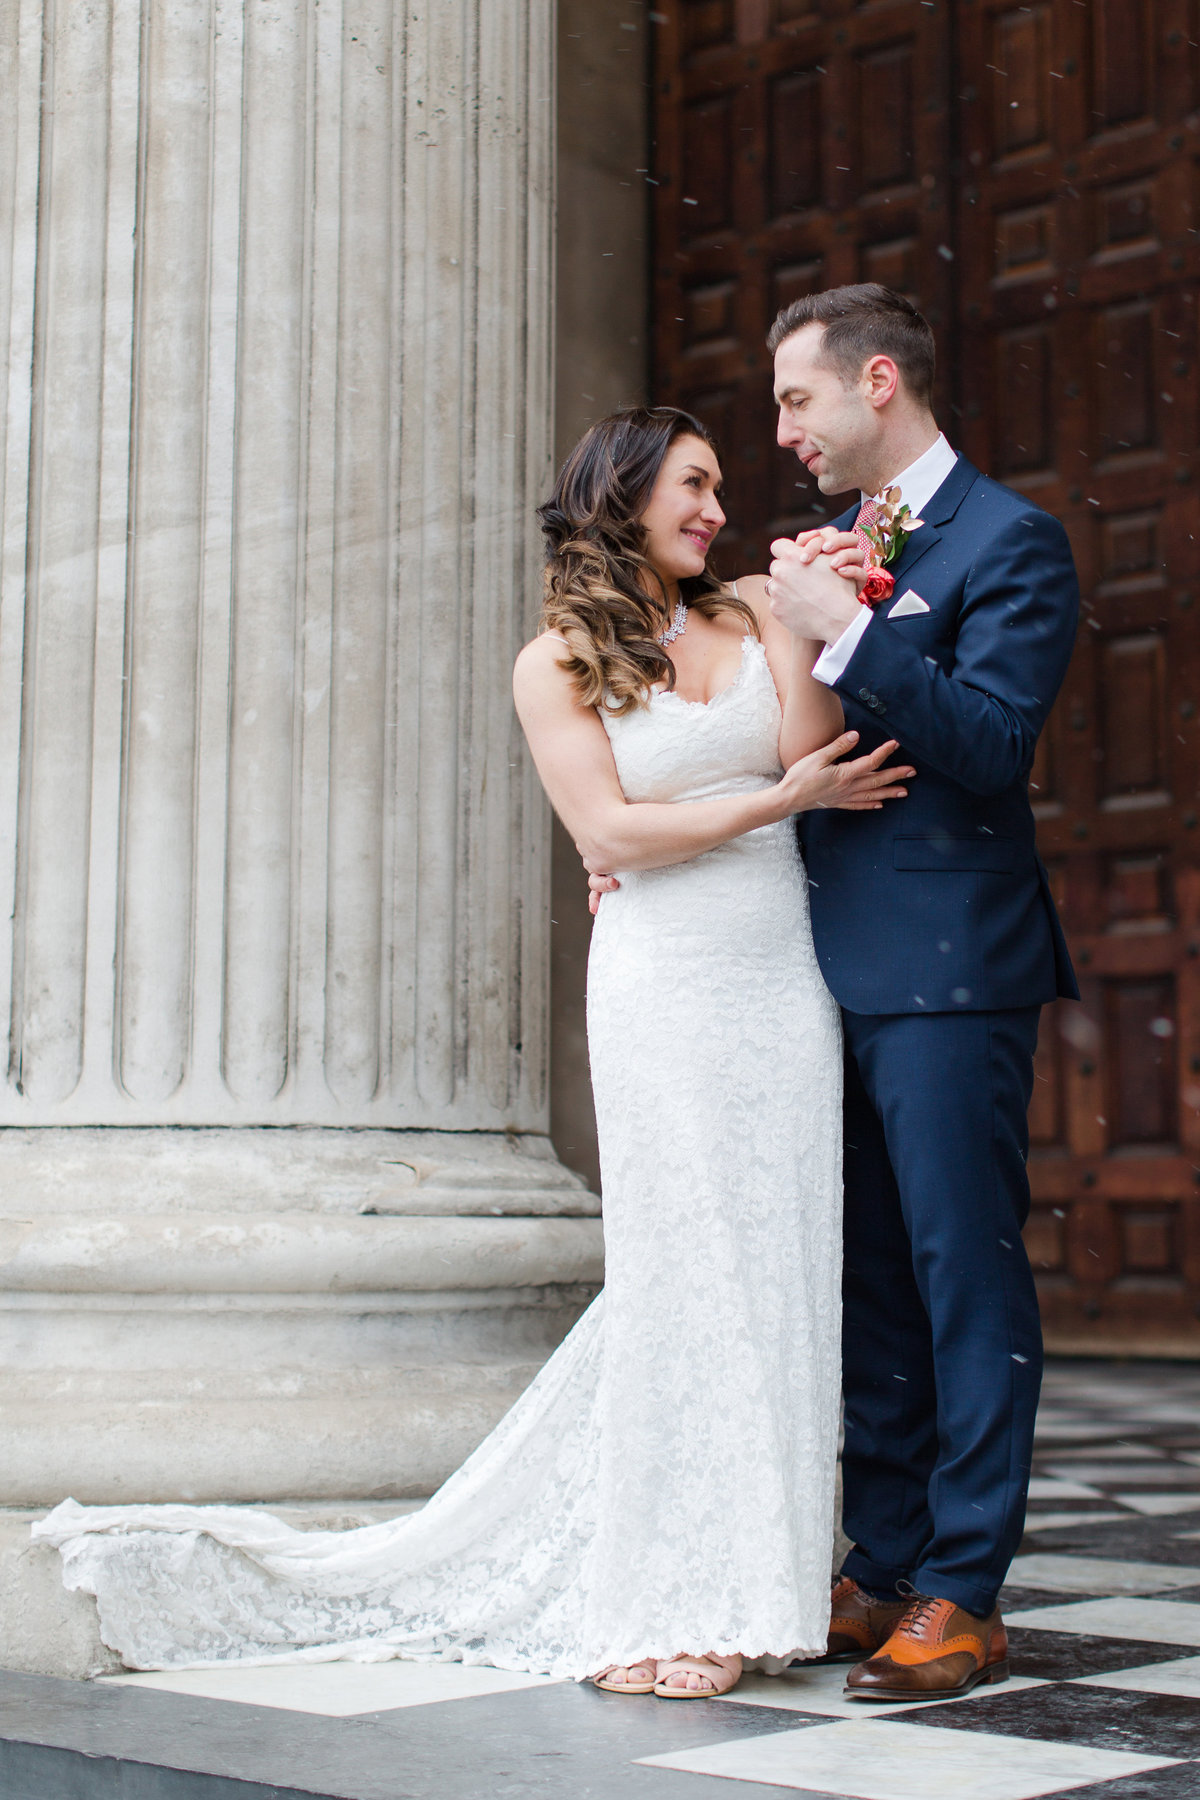 Bride and groom hold hands and stare into each others eyes intimately at this snowy winter wedding at St Paul's cathedral in London